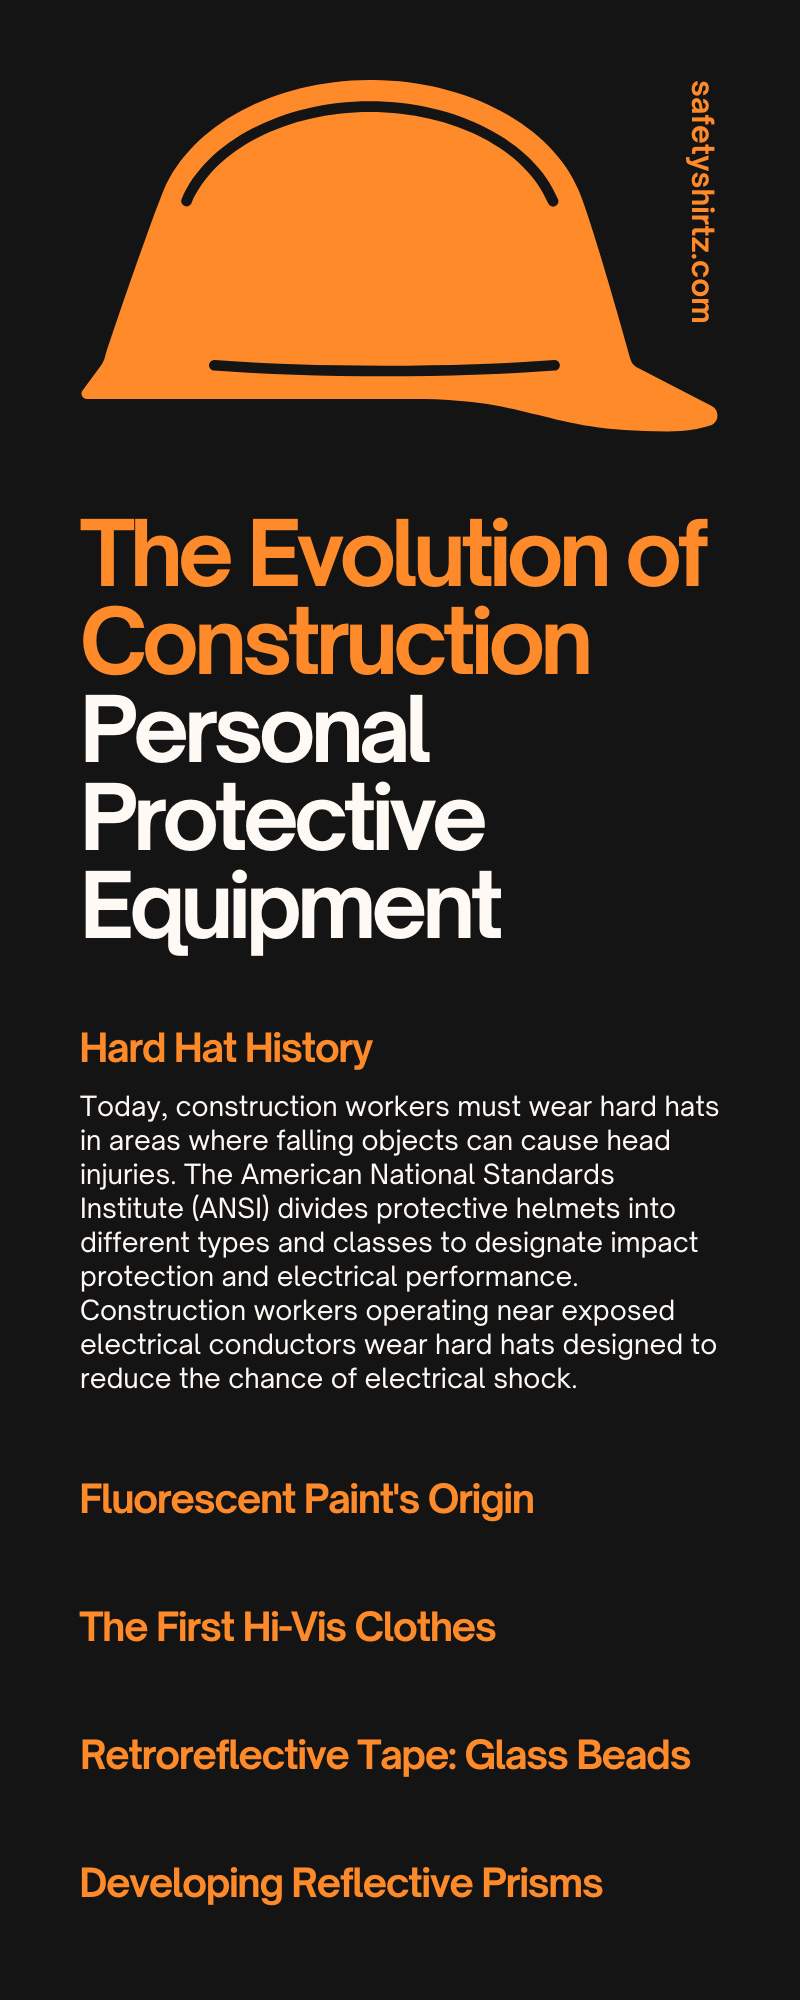 The Evolution of Construction Personal Protective Equipment